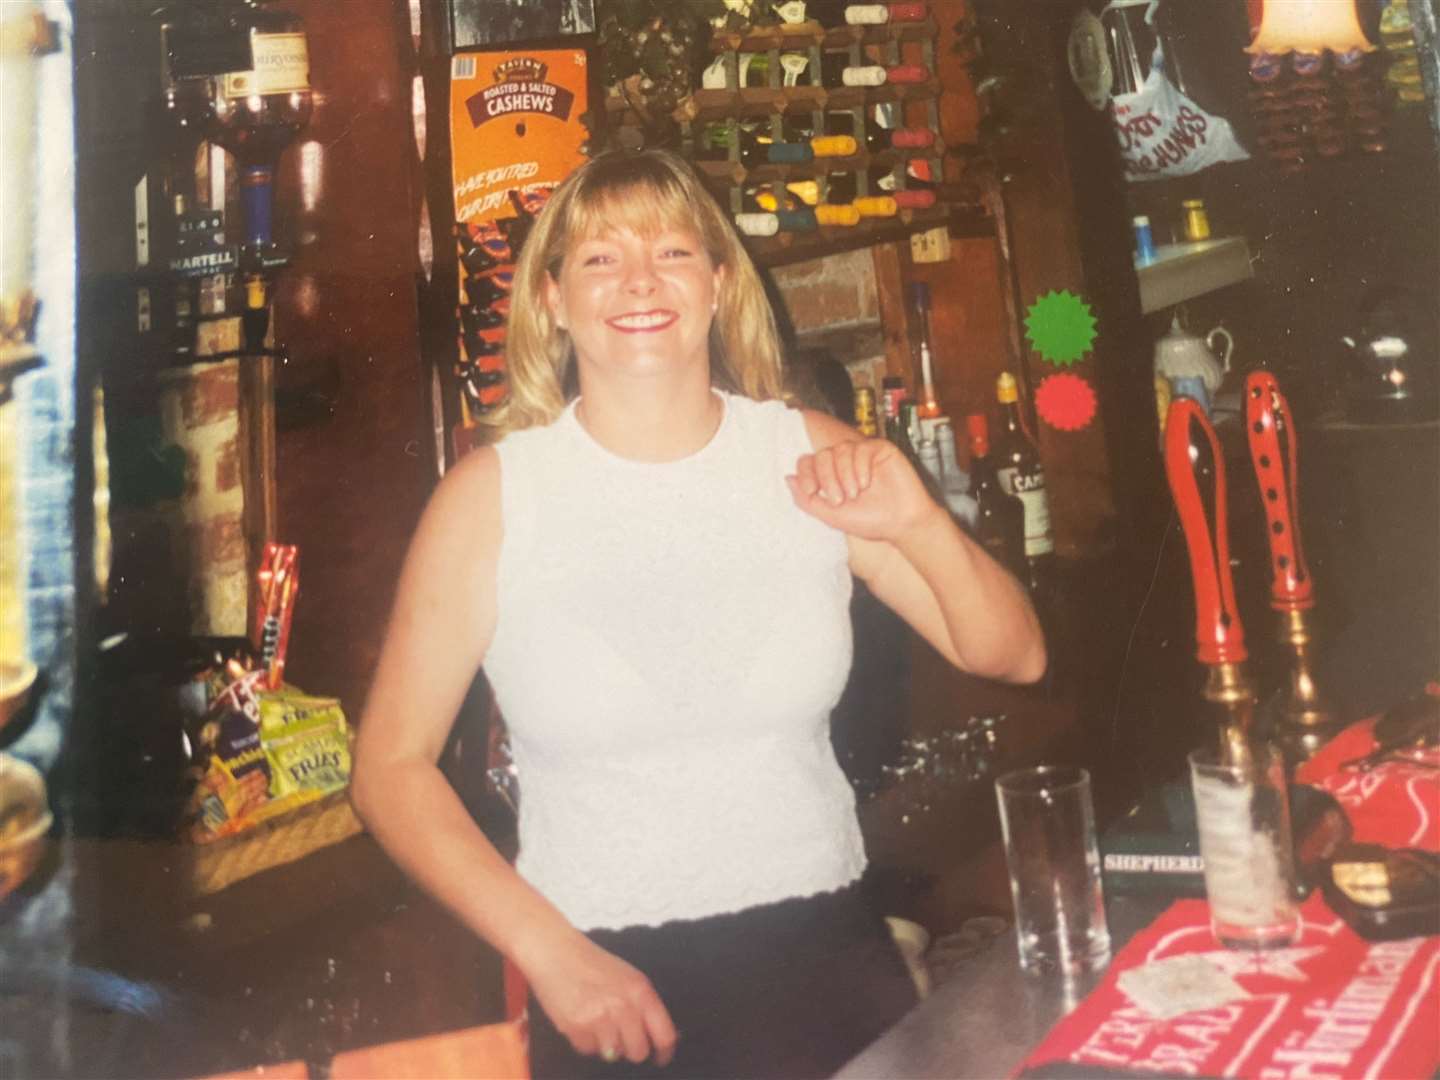 Smugglers Inn landlady Jackie Sutton ran the Herne boozer for 27 years